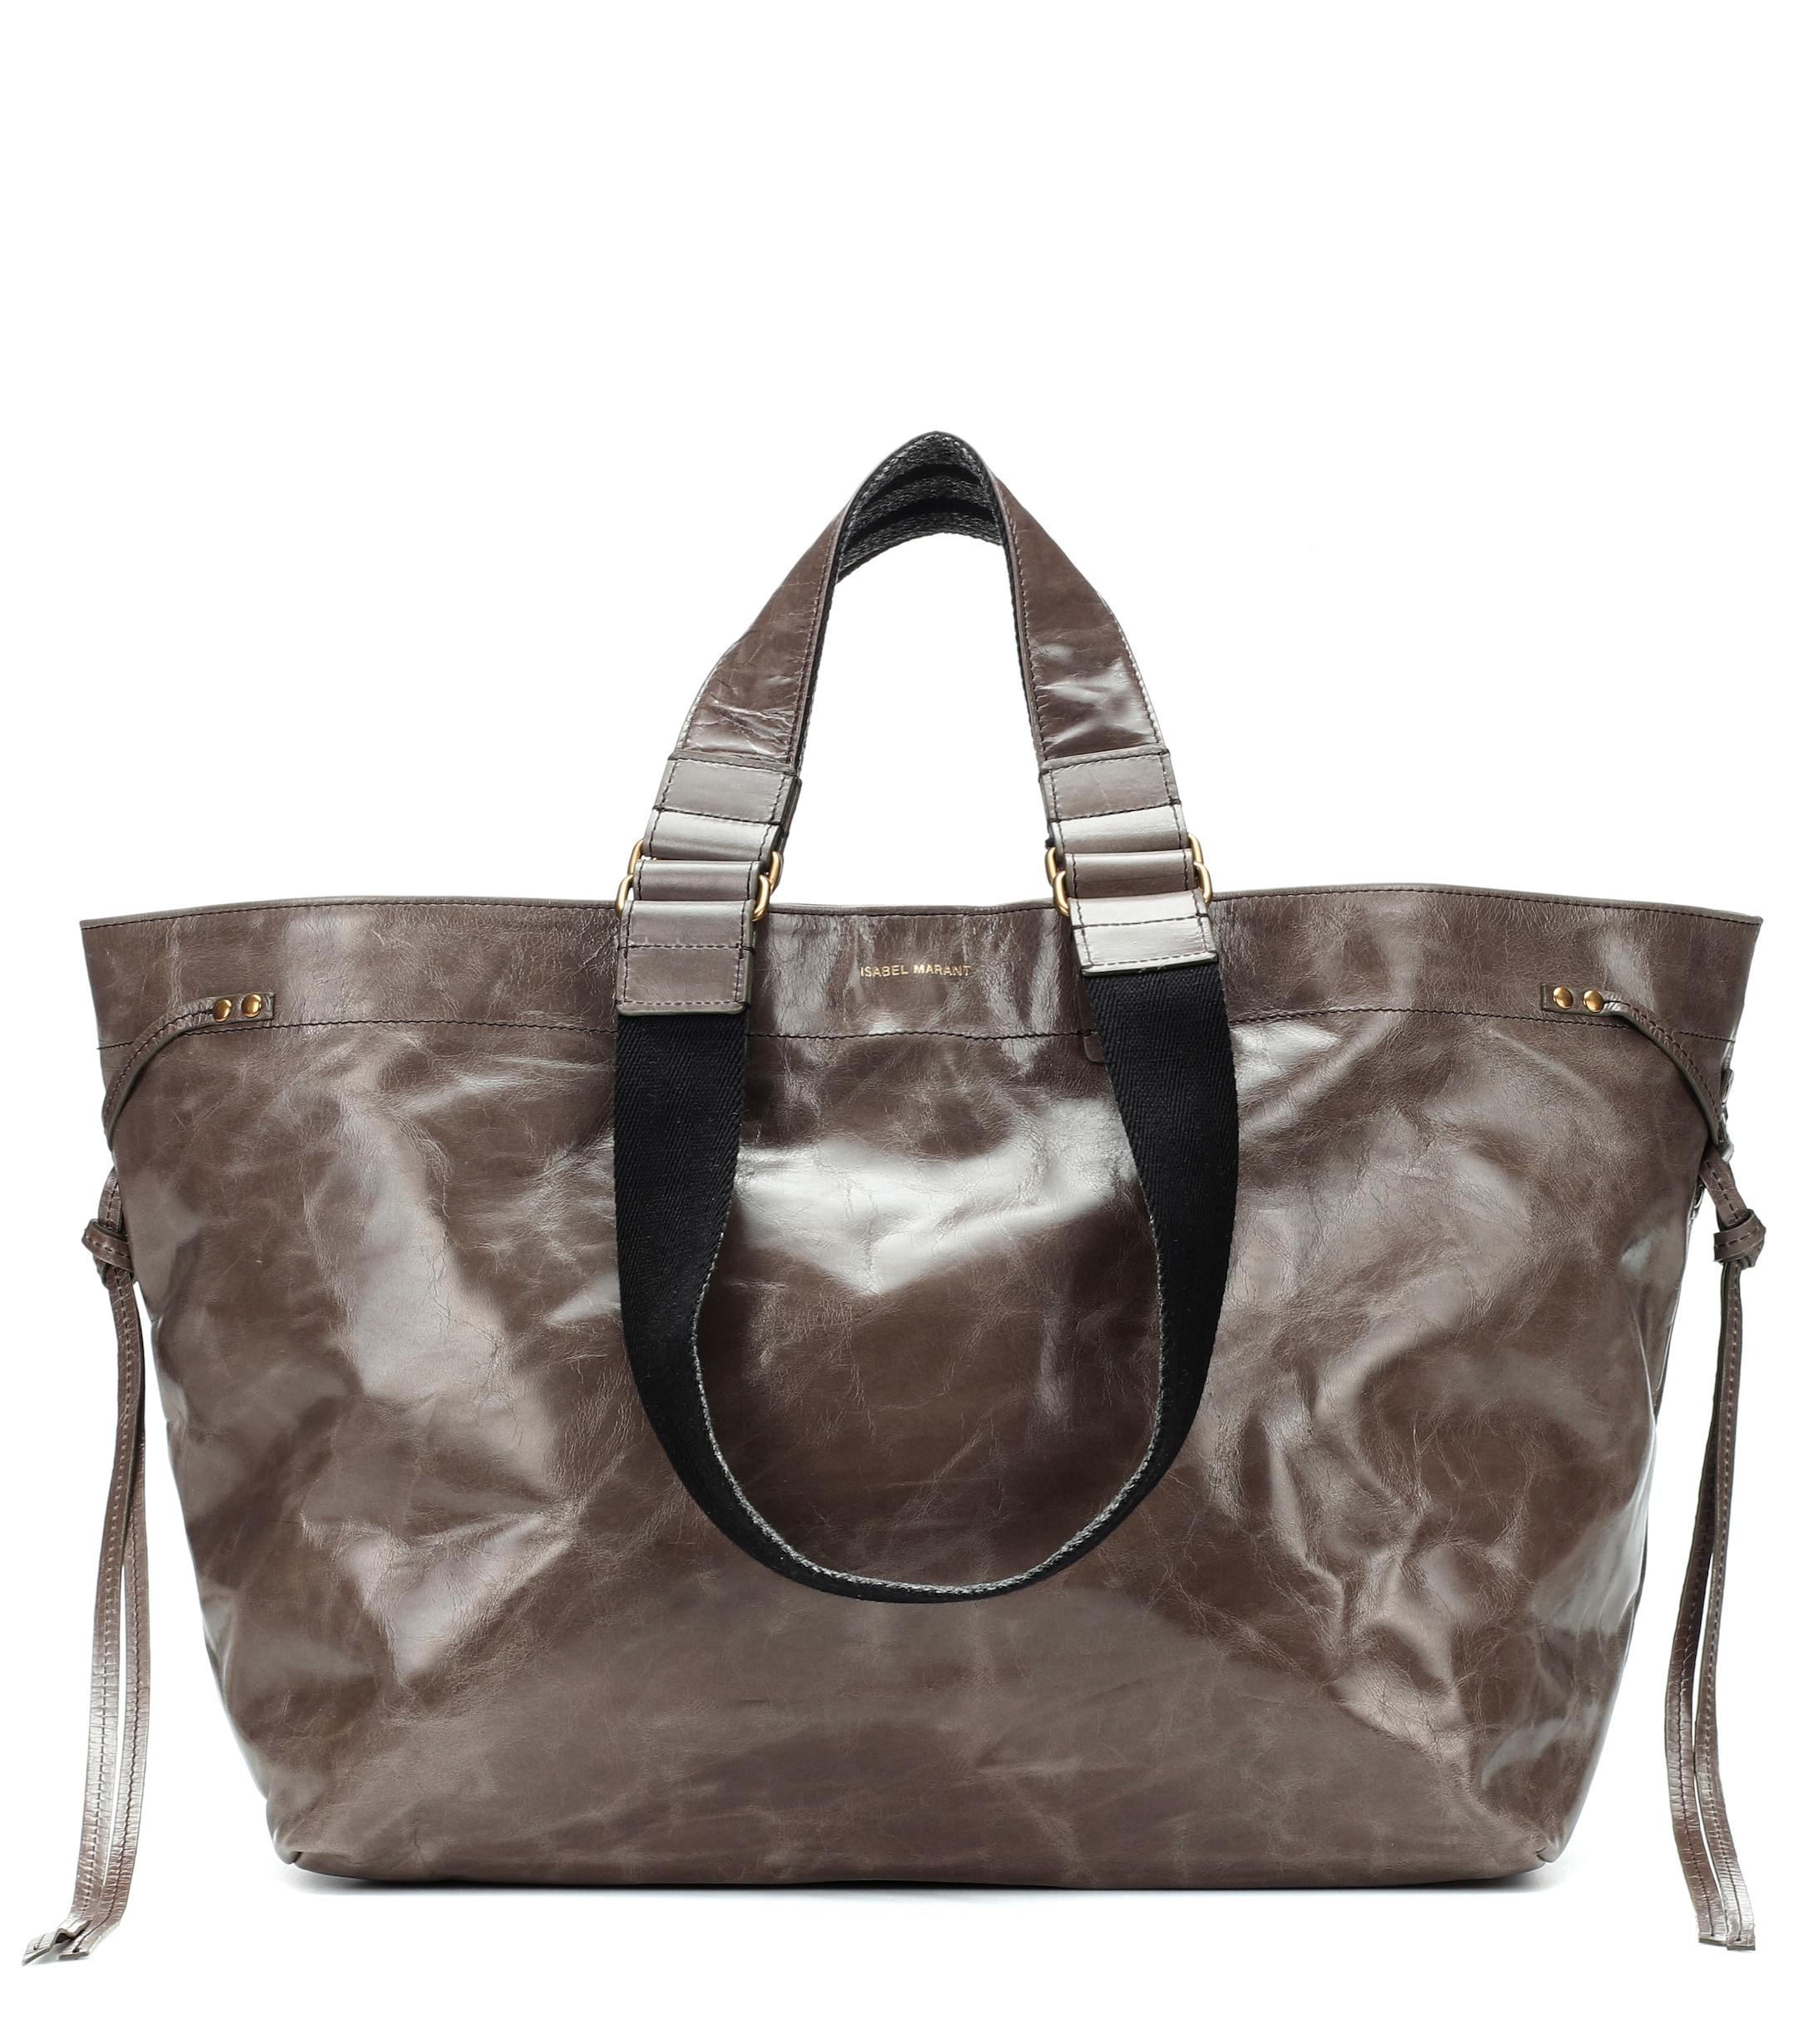 Isabel Marant Leather Wardy Tote Bag in Grey (Gray) - Save 18% - Lyst